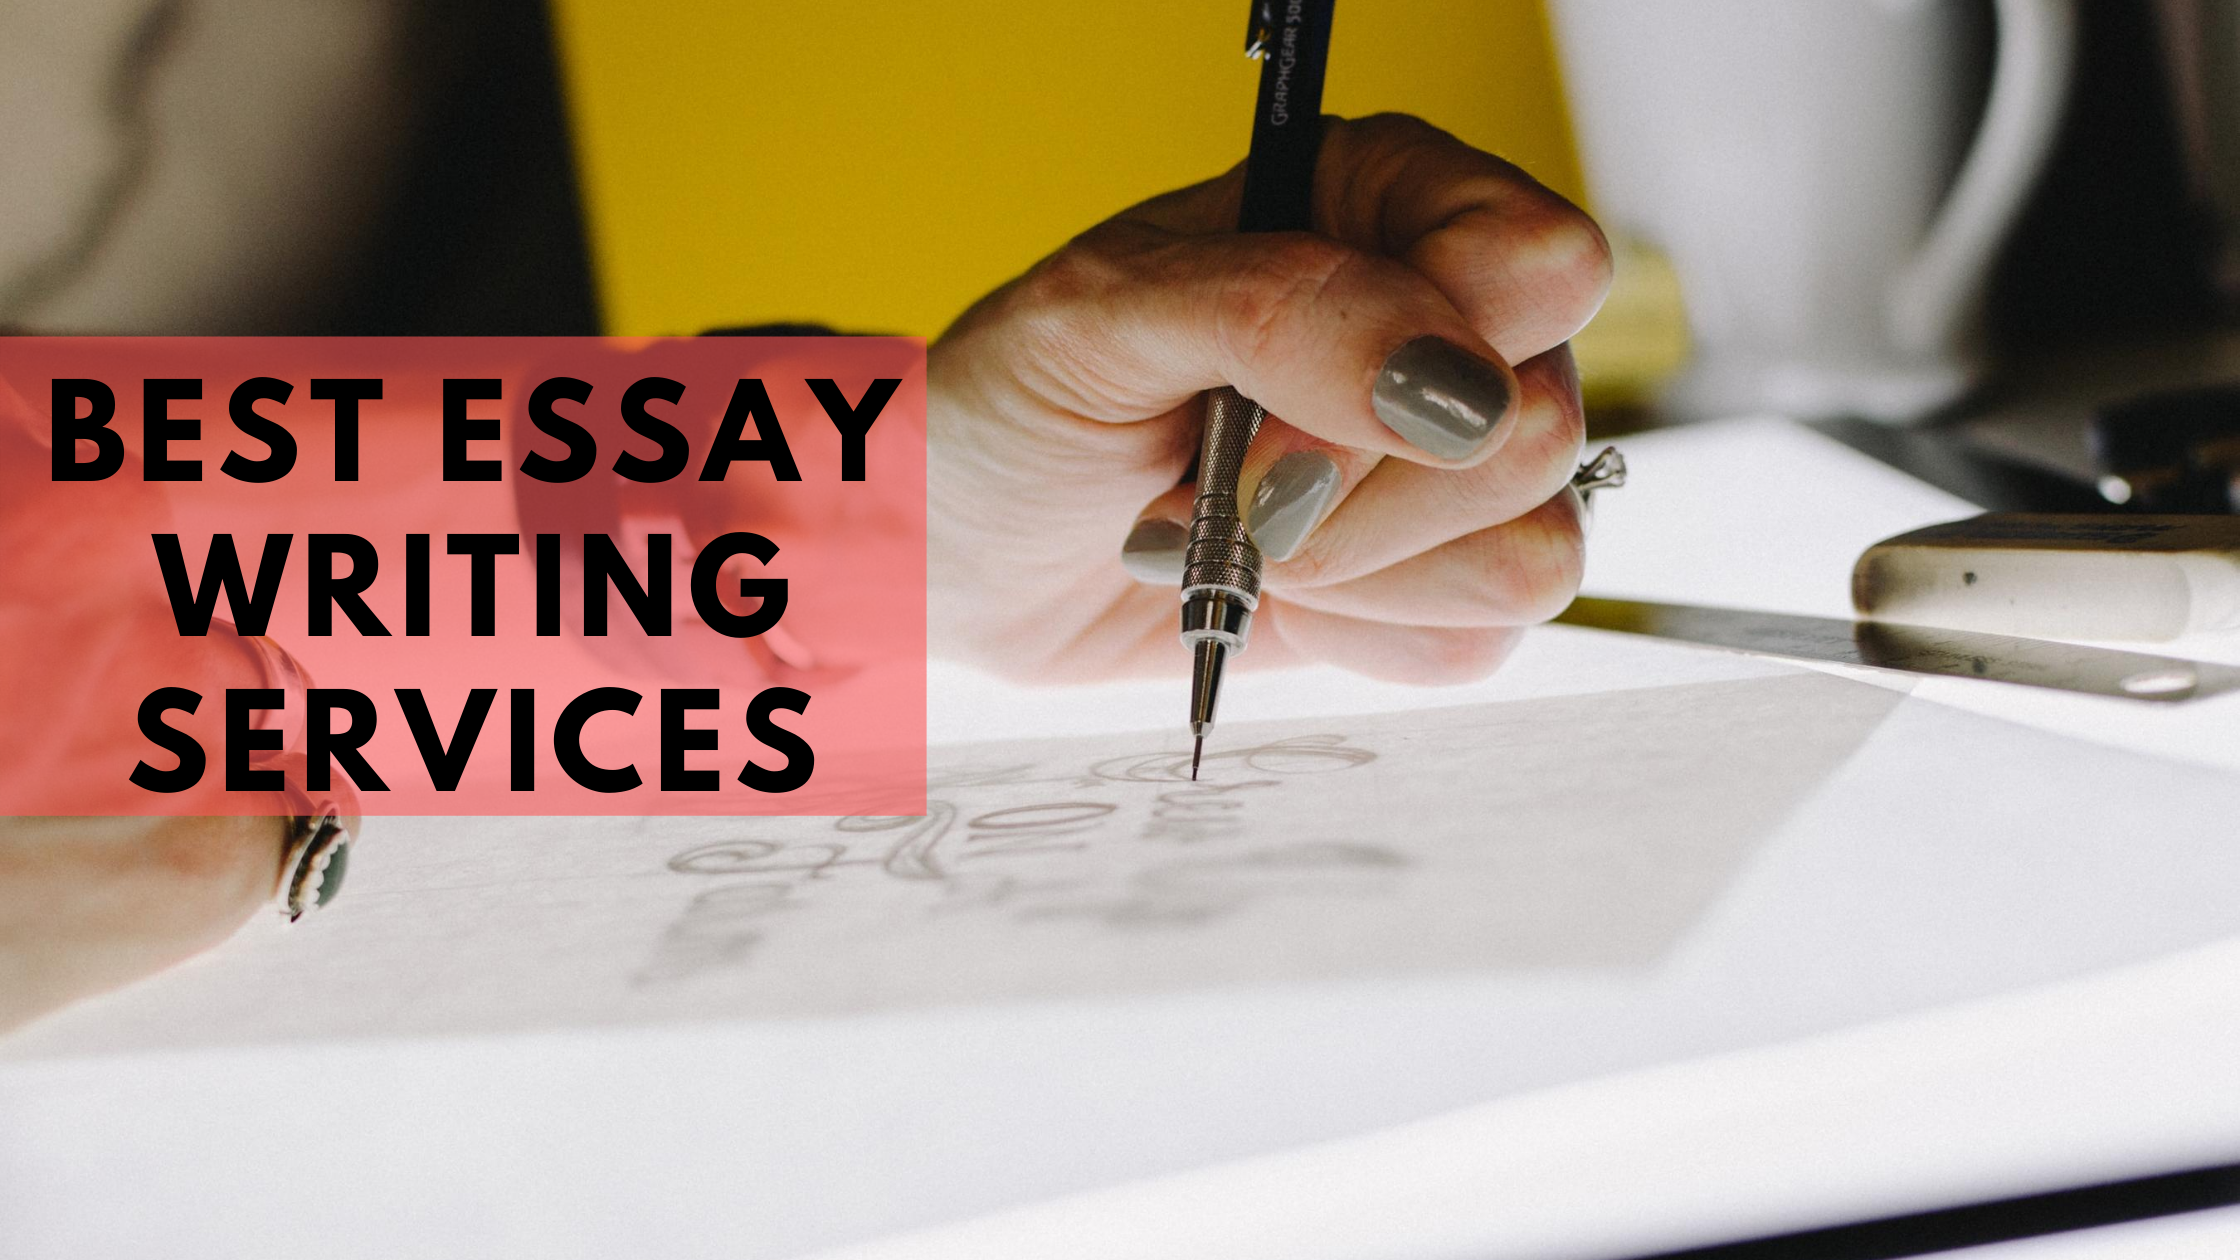 What is the Best Essay Writing Service